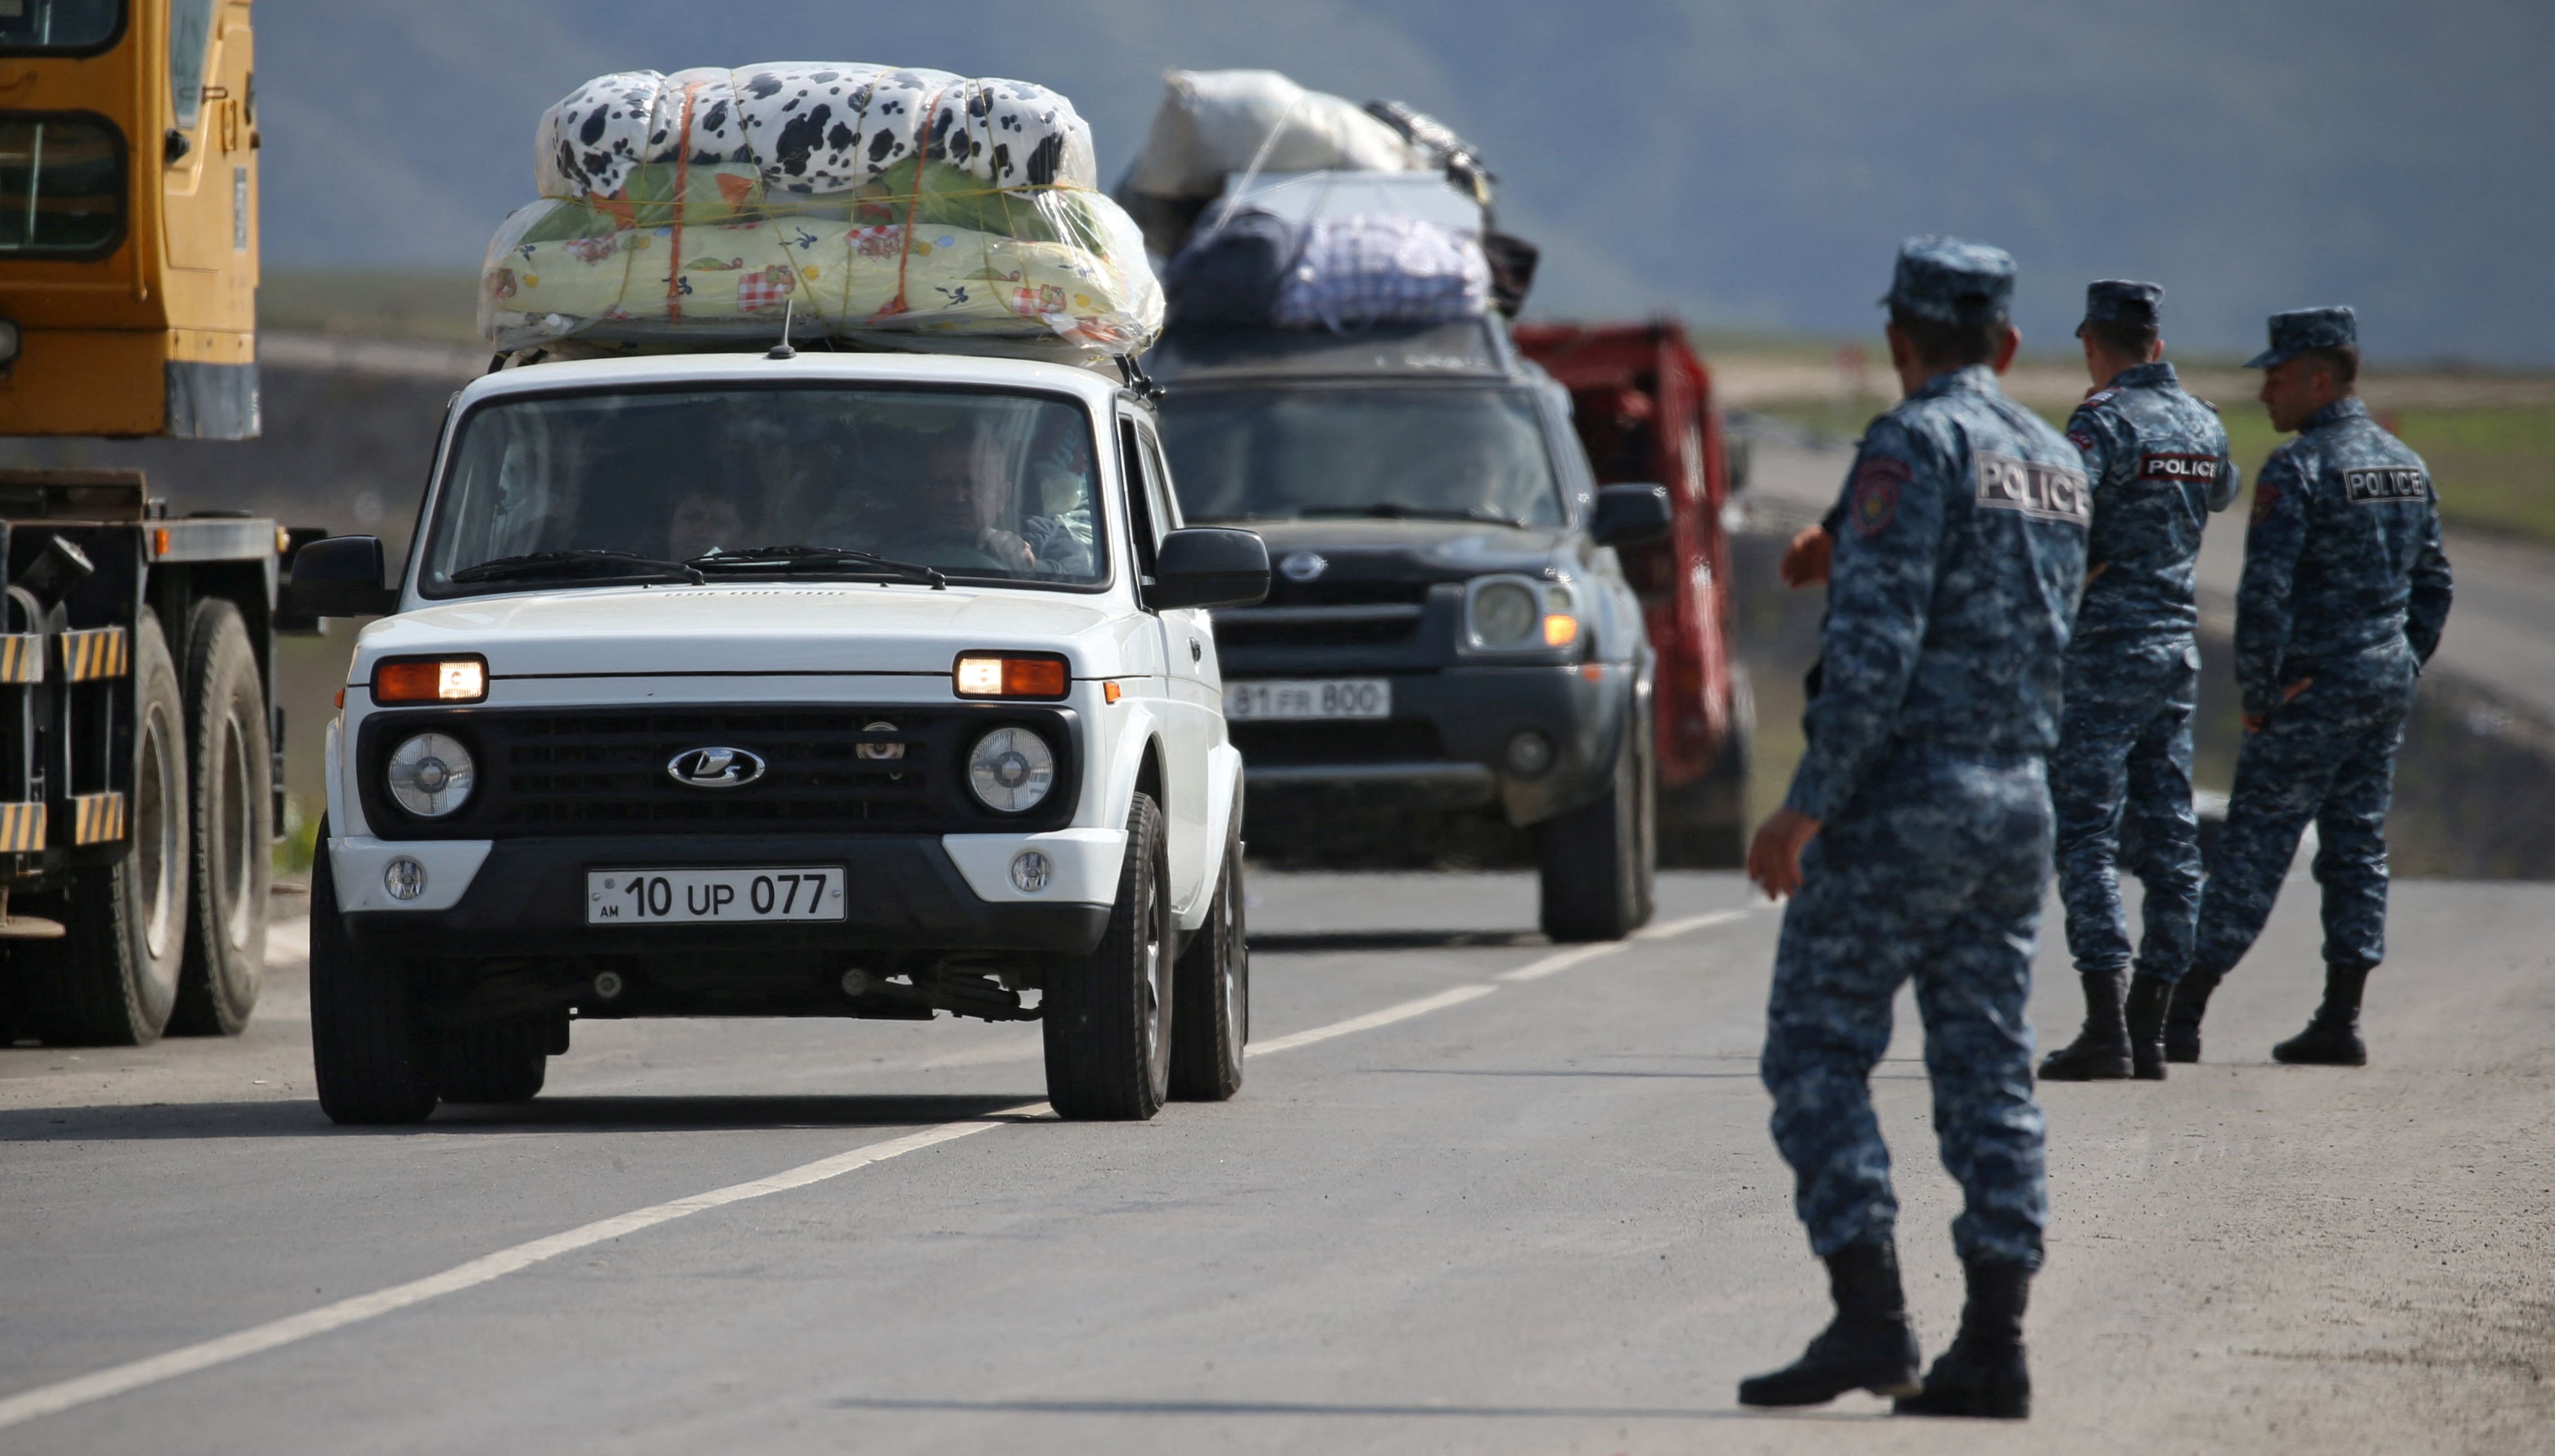 Armenia reports new border clashes with Azerbaijan forces, Conflict News